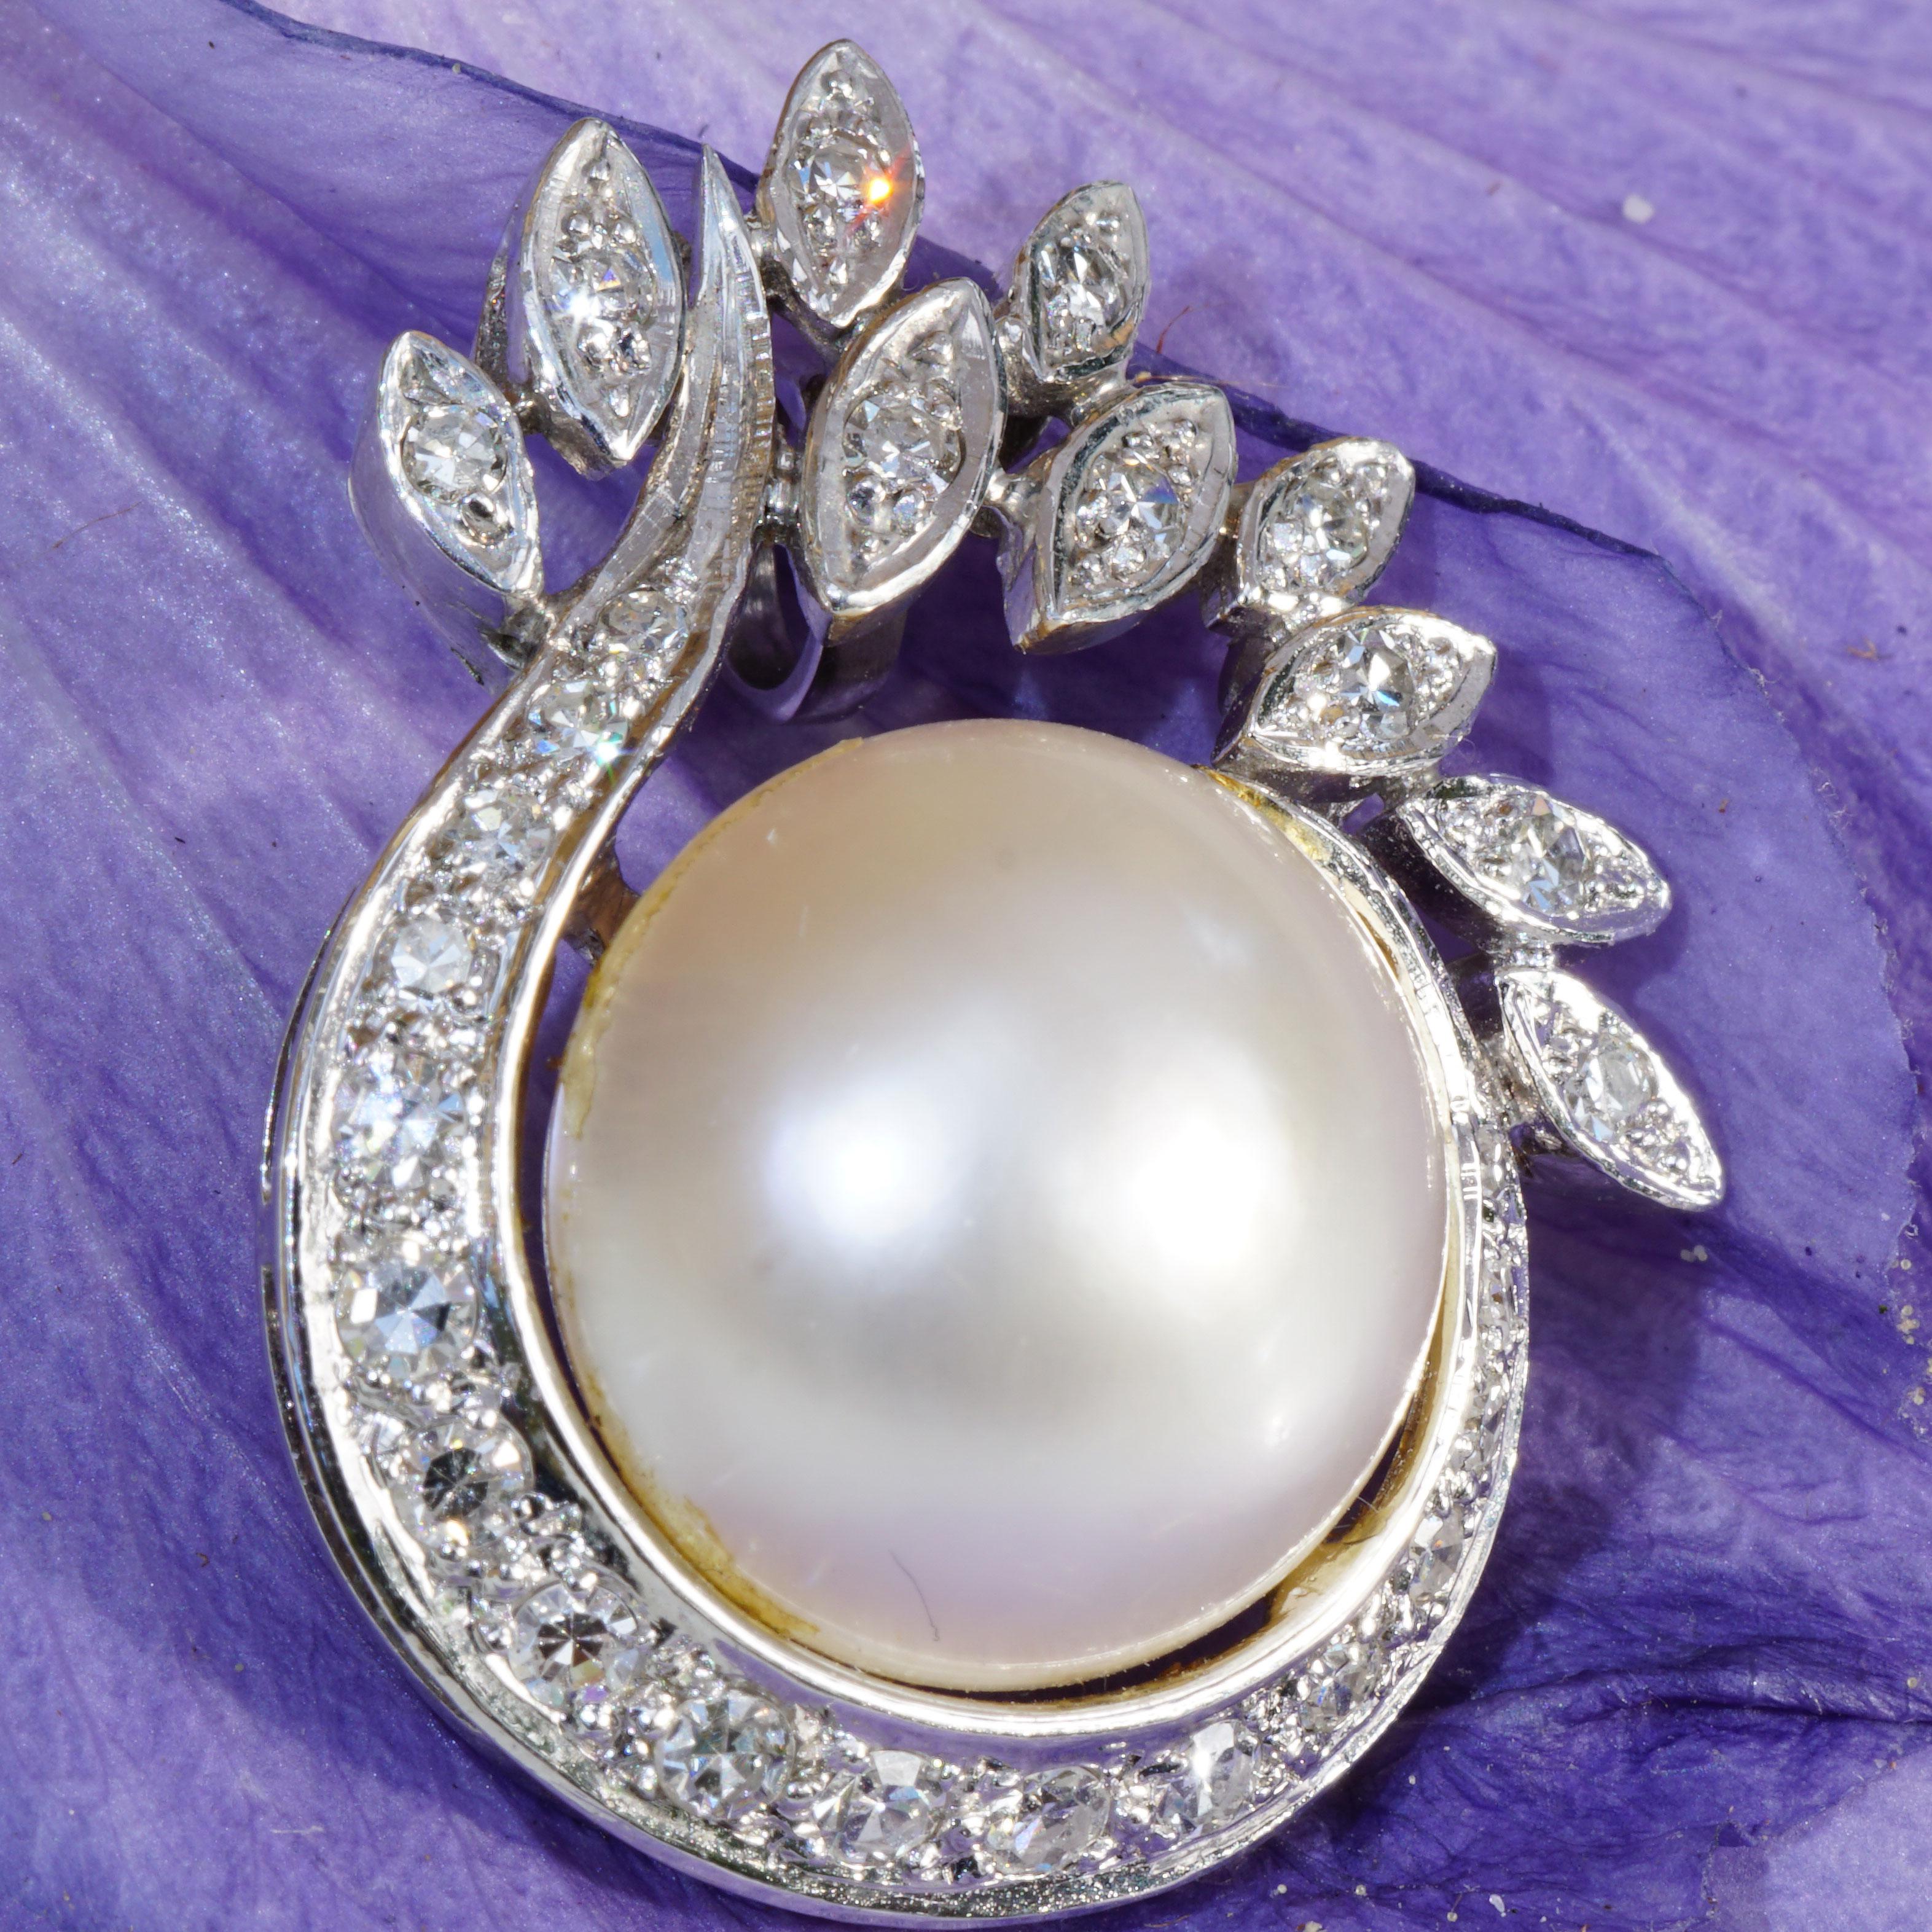 Mabe Pearl Brilliant Pendant White Gold 0.60 ct TW VS 27 x 22 mm large Eyelet In Good Condition For Sale In Viena, Viena